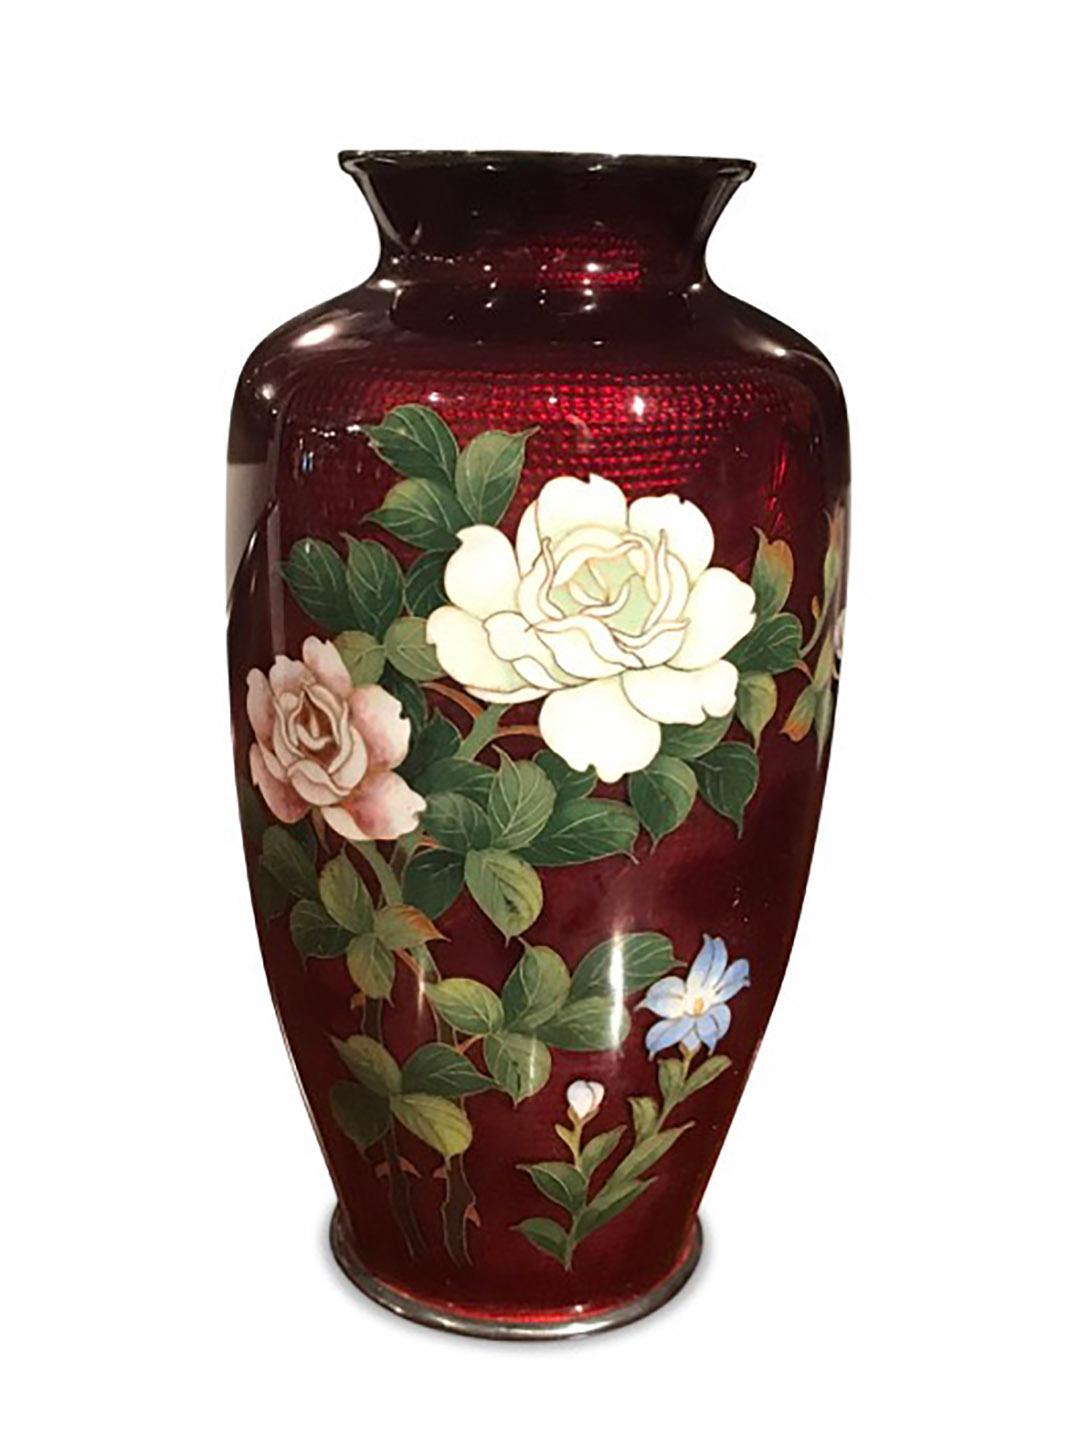 Japanese cloisonné akasuke (pigeon blood) style vase decorated with roses and ginbari foil basse-taile bamboo designs and patterning and silver trim.
 